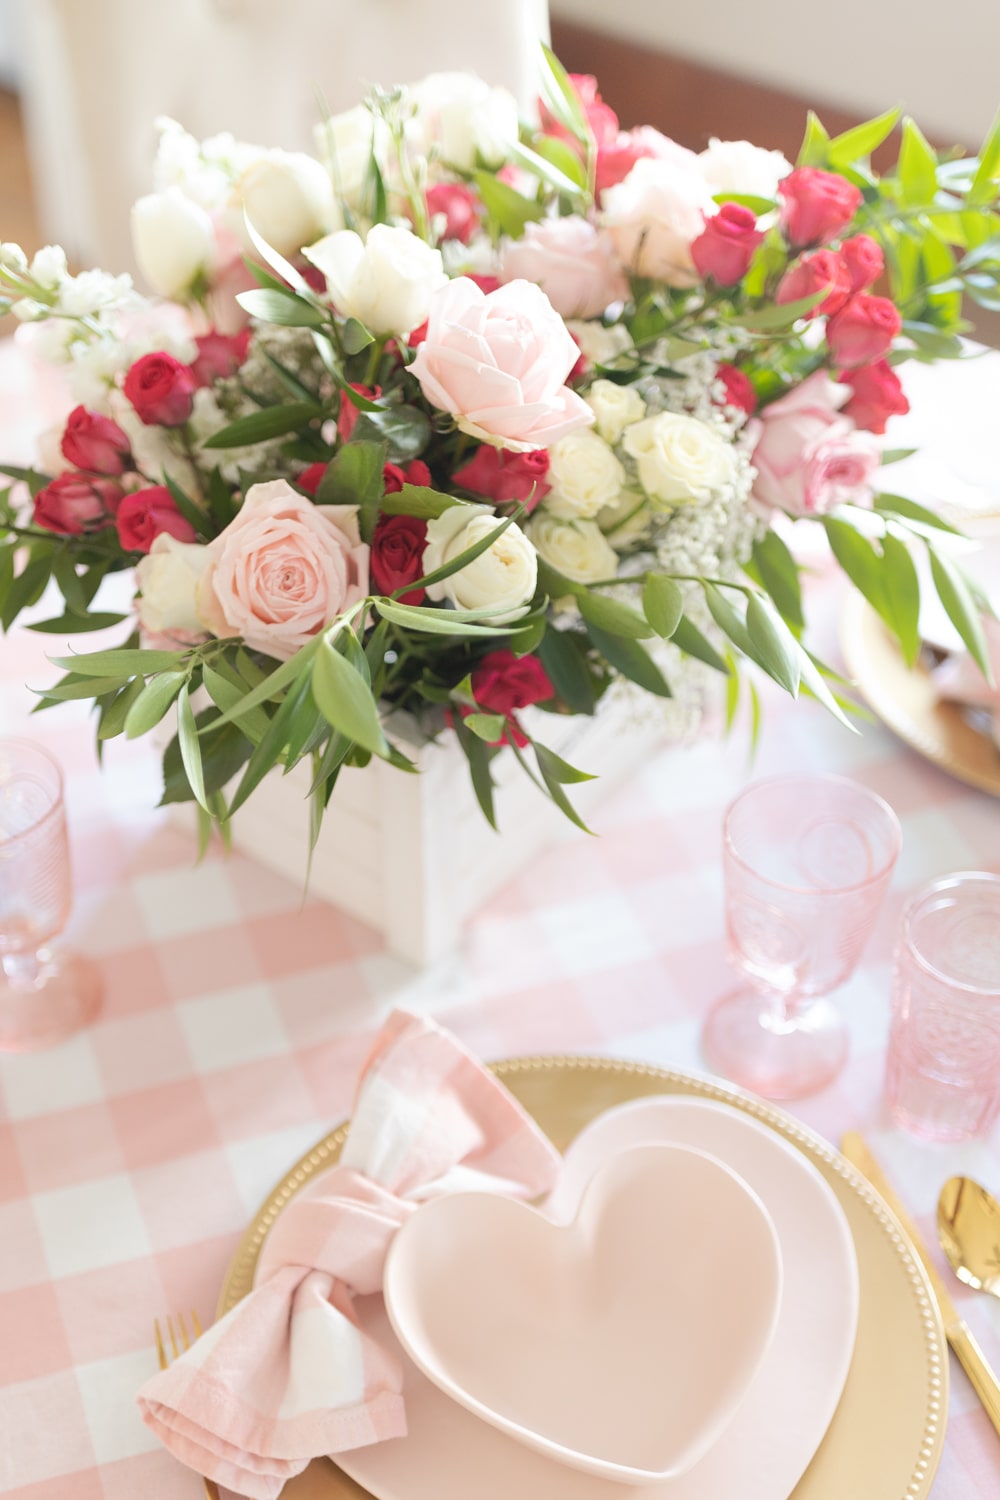 Pink Valentine's Day Table Decor Ideas for a Galentine's Brunch